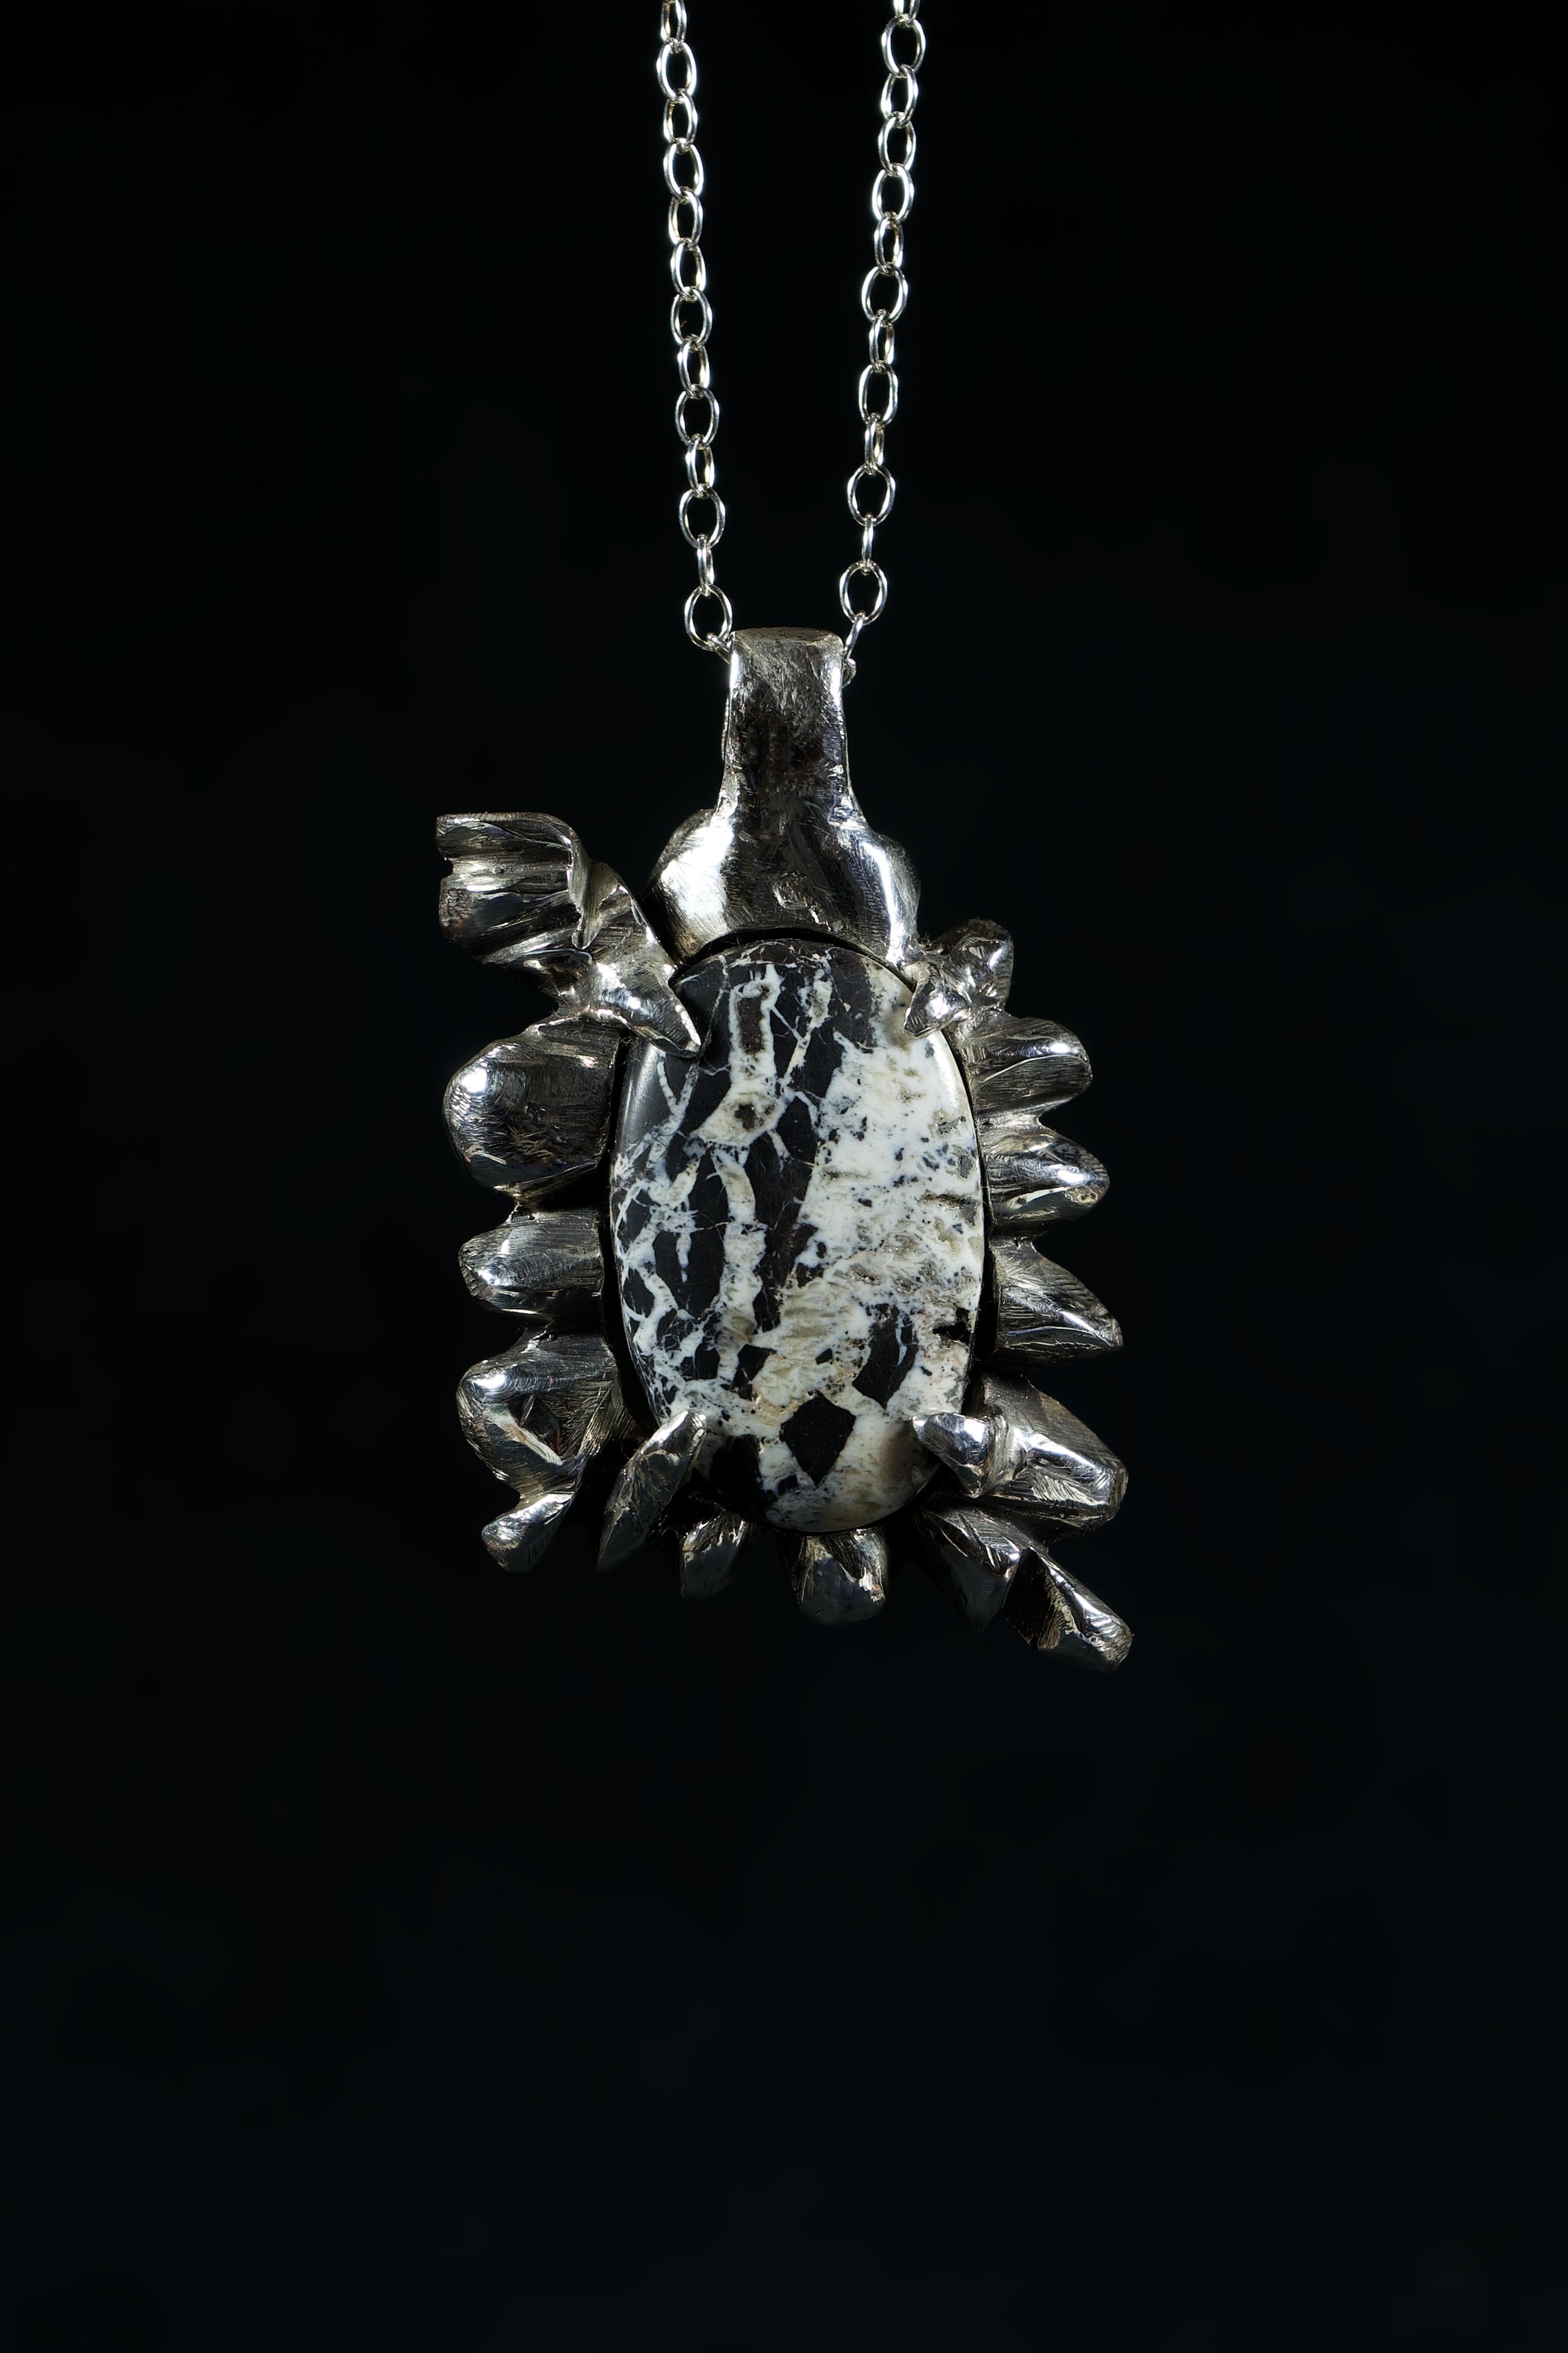 Aspen Tree is an exquisite pendant handcrafted by Ken Fury in sterling silver, featuring a rare and unique White Buffalo Turquoise stone from Nevada. The stone's characteristic white color with black and brown veins resembles the appearance of a